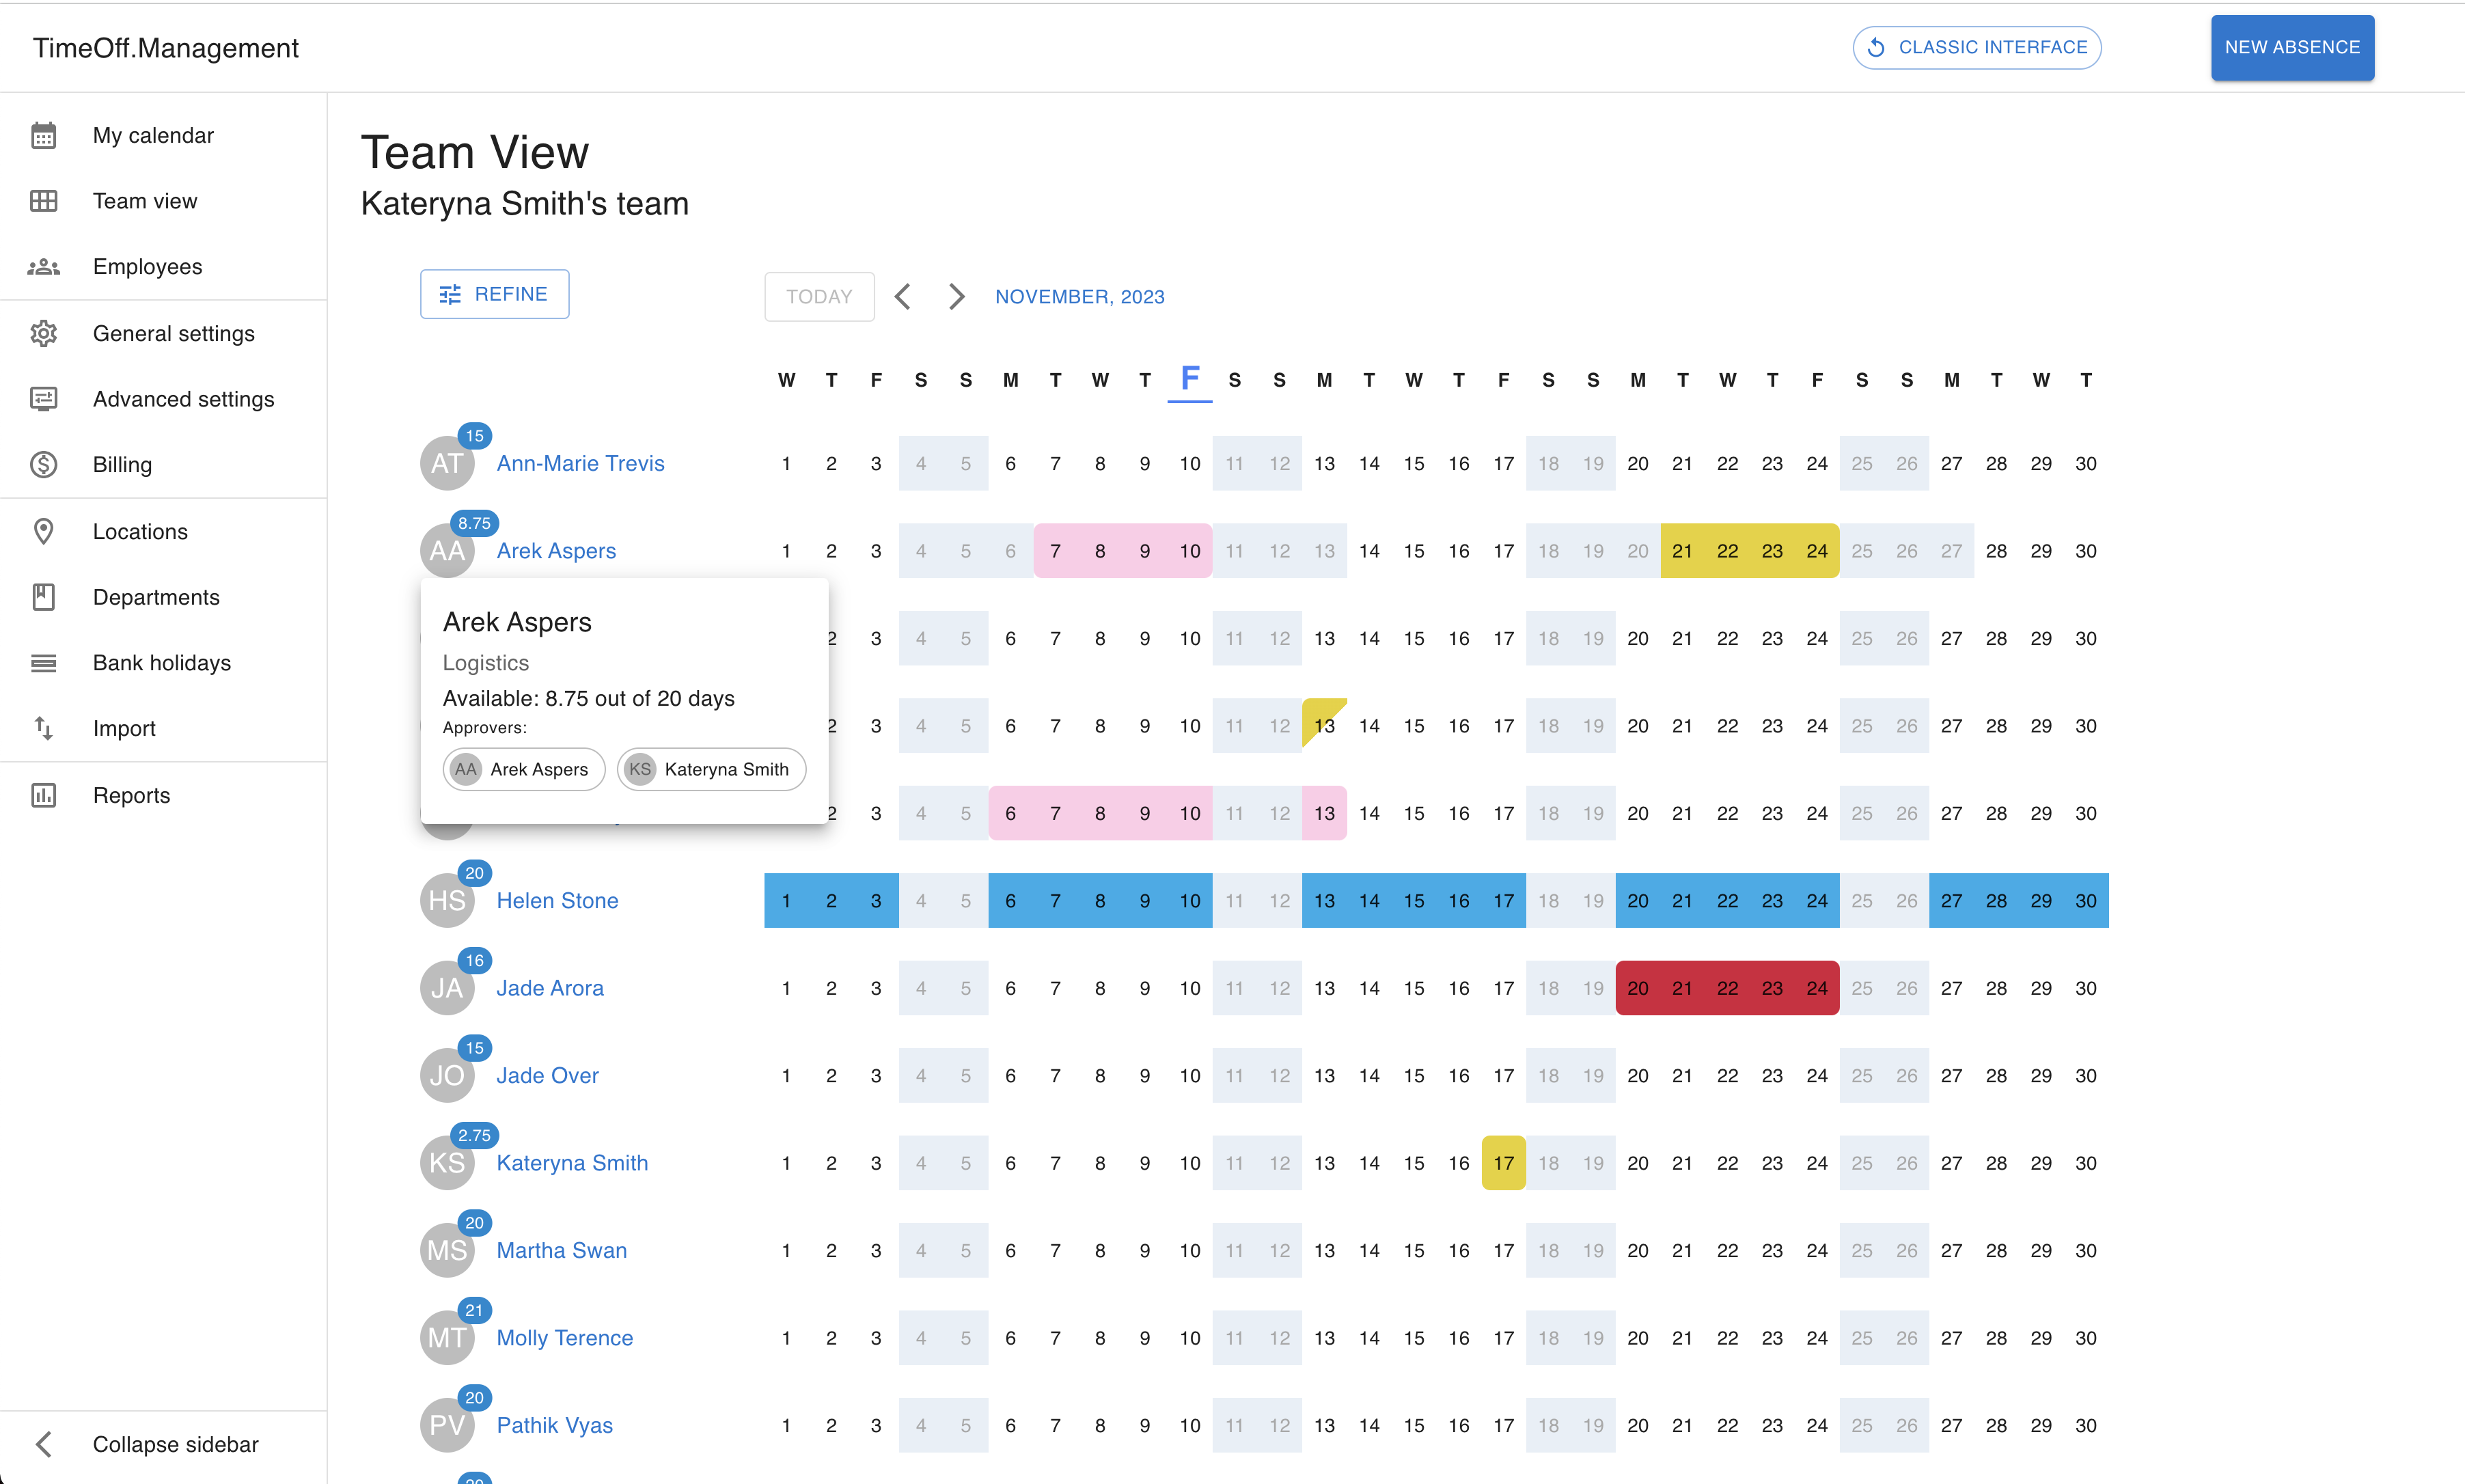 Screenshot of the TimeOff.management dashboard showing booked leave requests